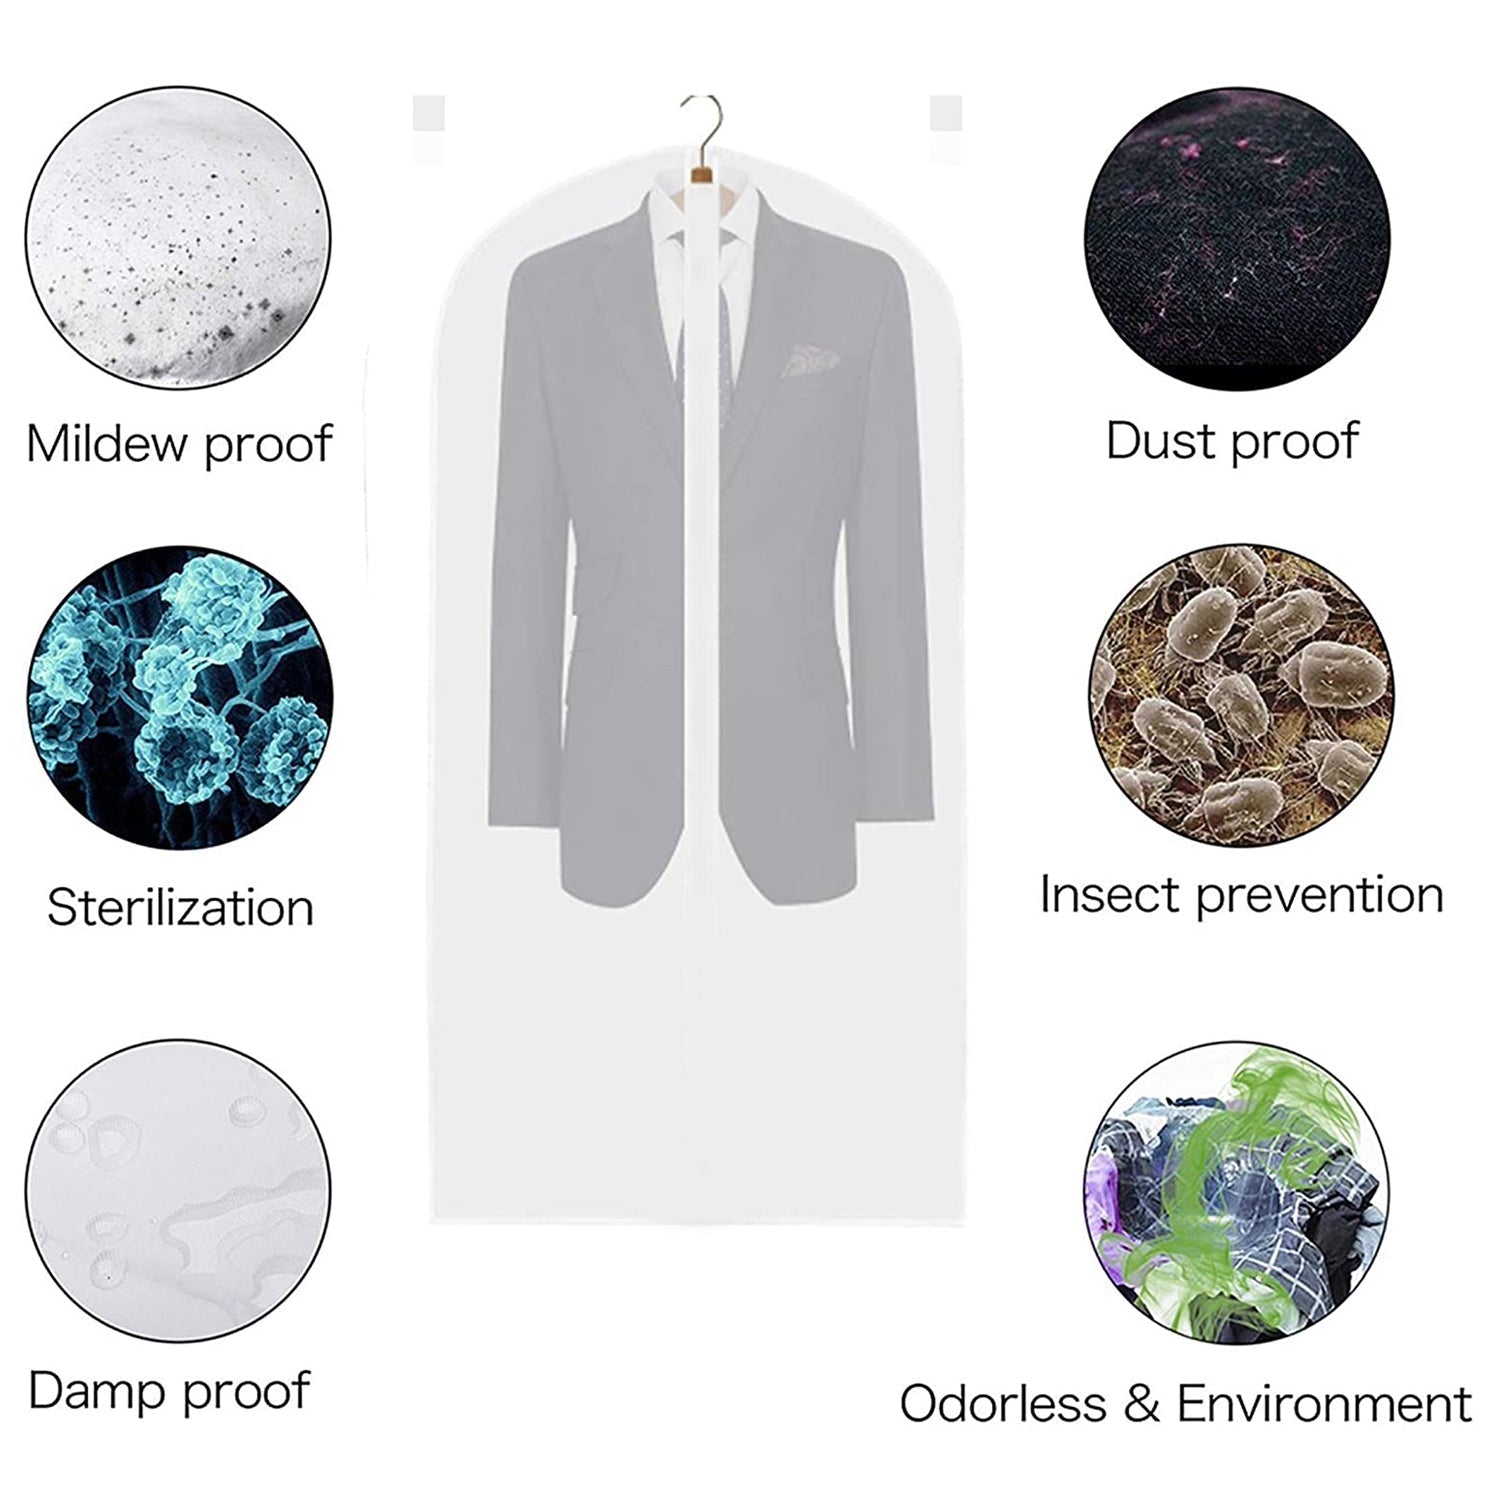 6256 COAT BLAZER COVER TRANSPARENT COVER FOR MULTI USE COVER ( 5 Pcs ) ( Hanger Not Included ) DeoDap